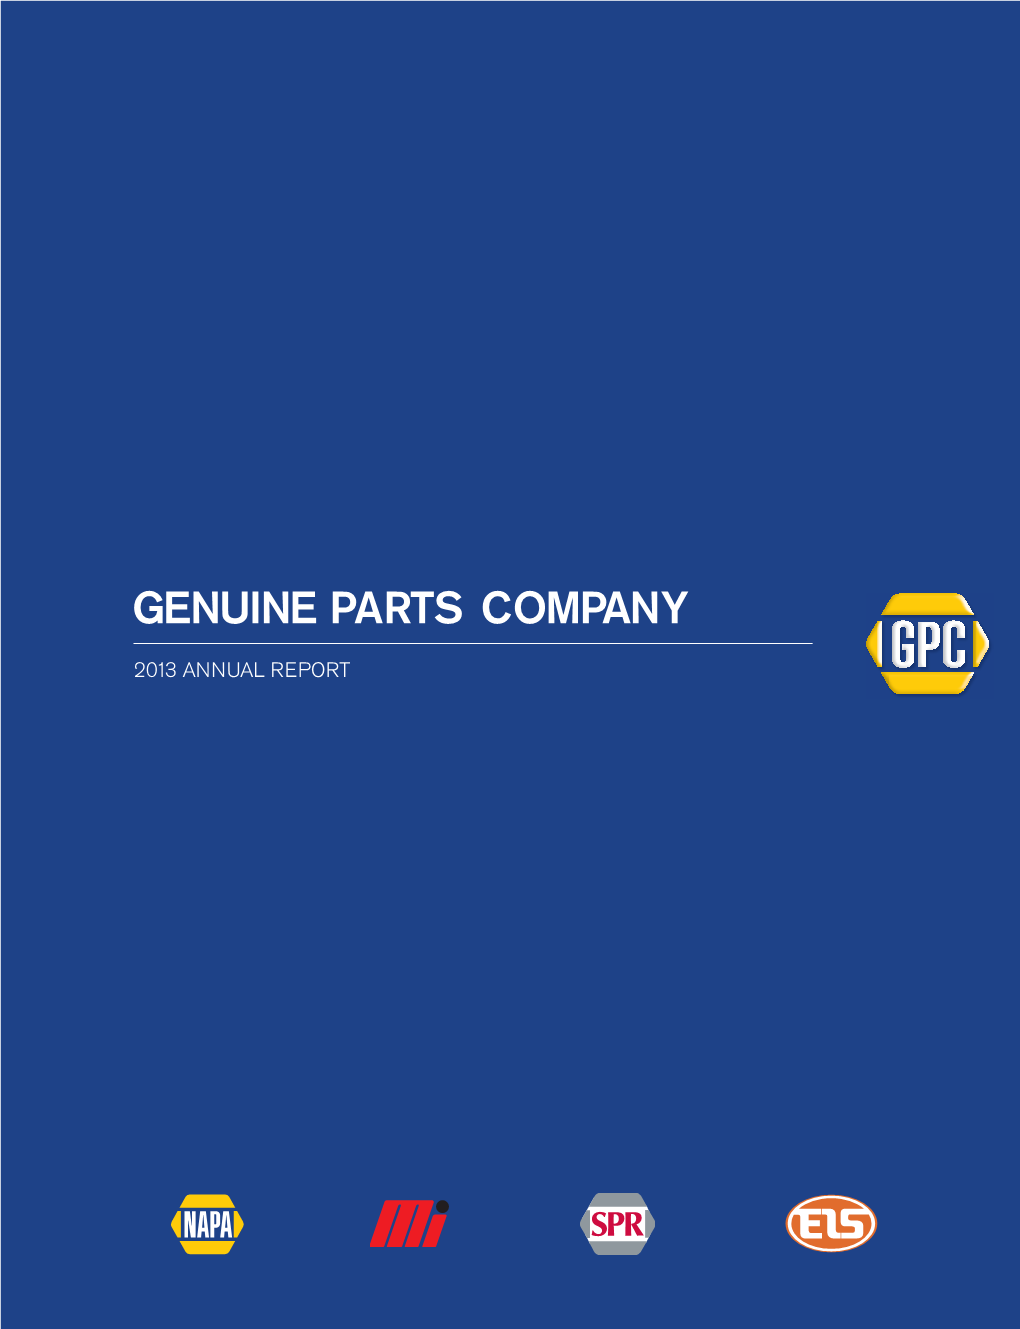 Genuine Parts Company Financial Highlights